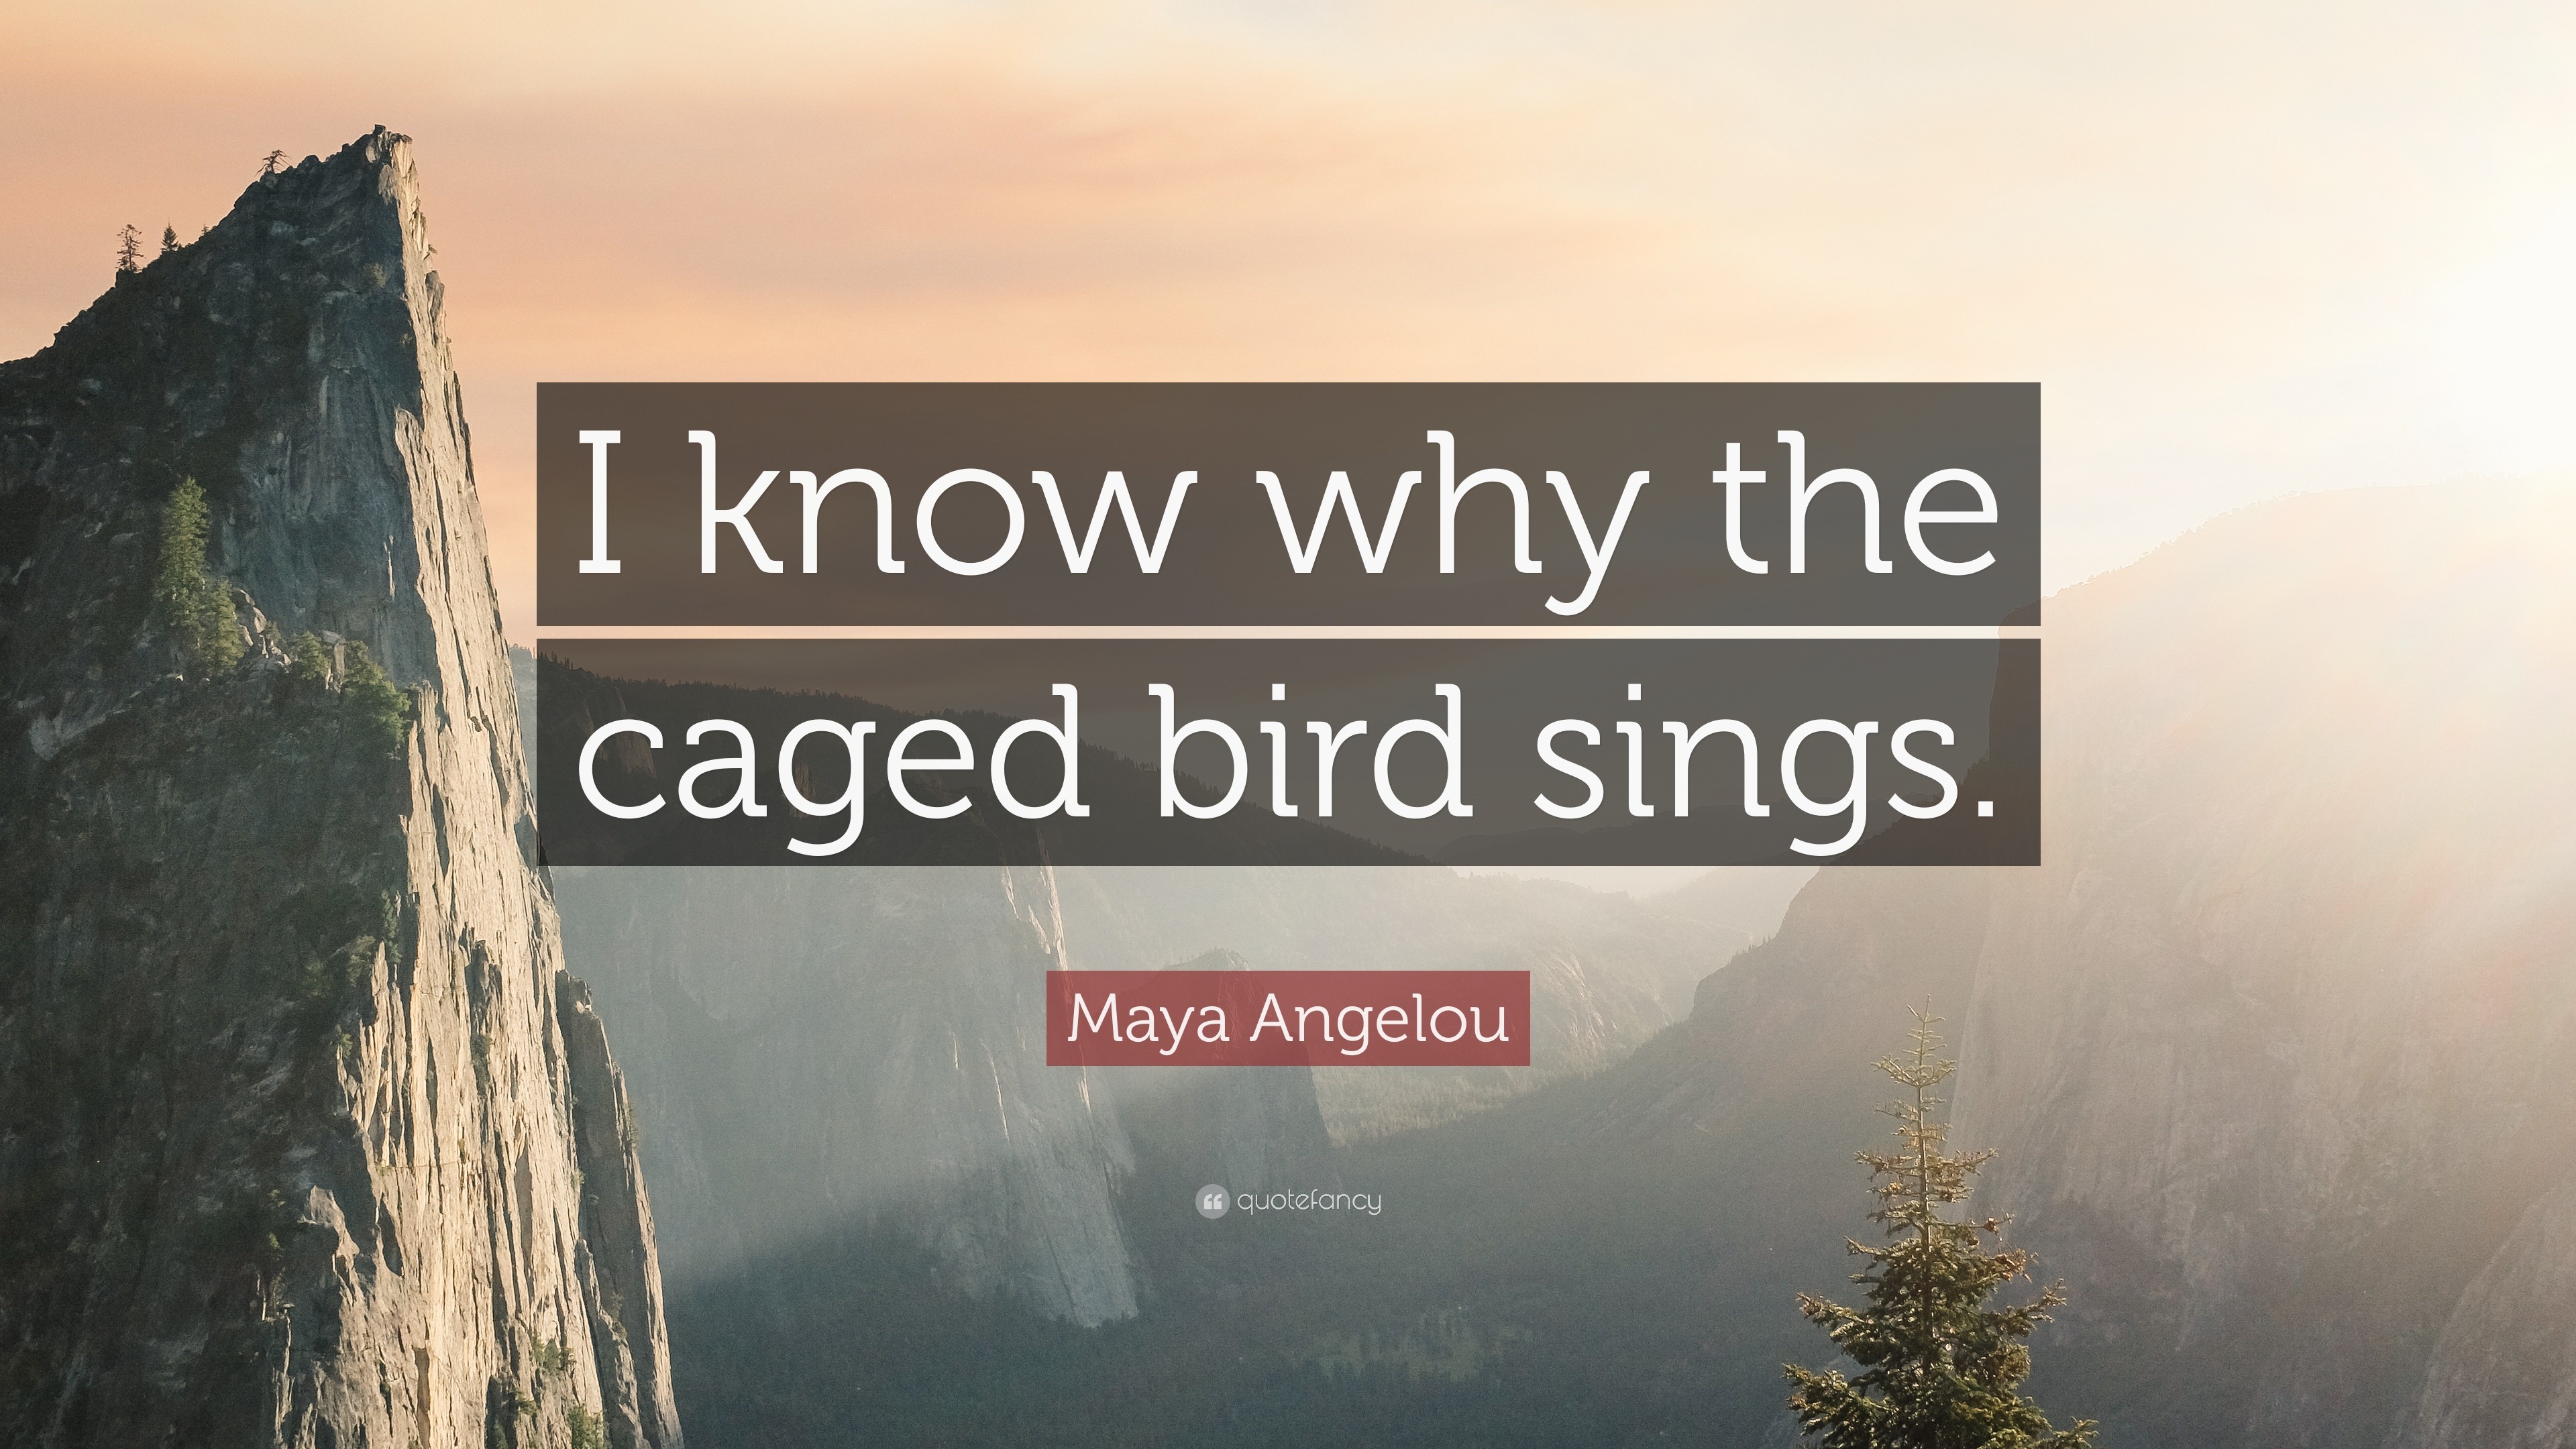 Know maya the caged bird why i sings angelou Know Why